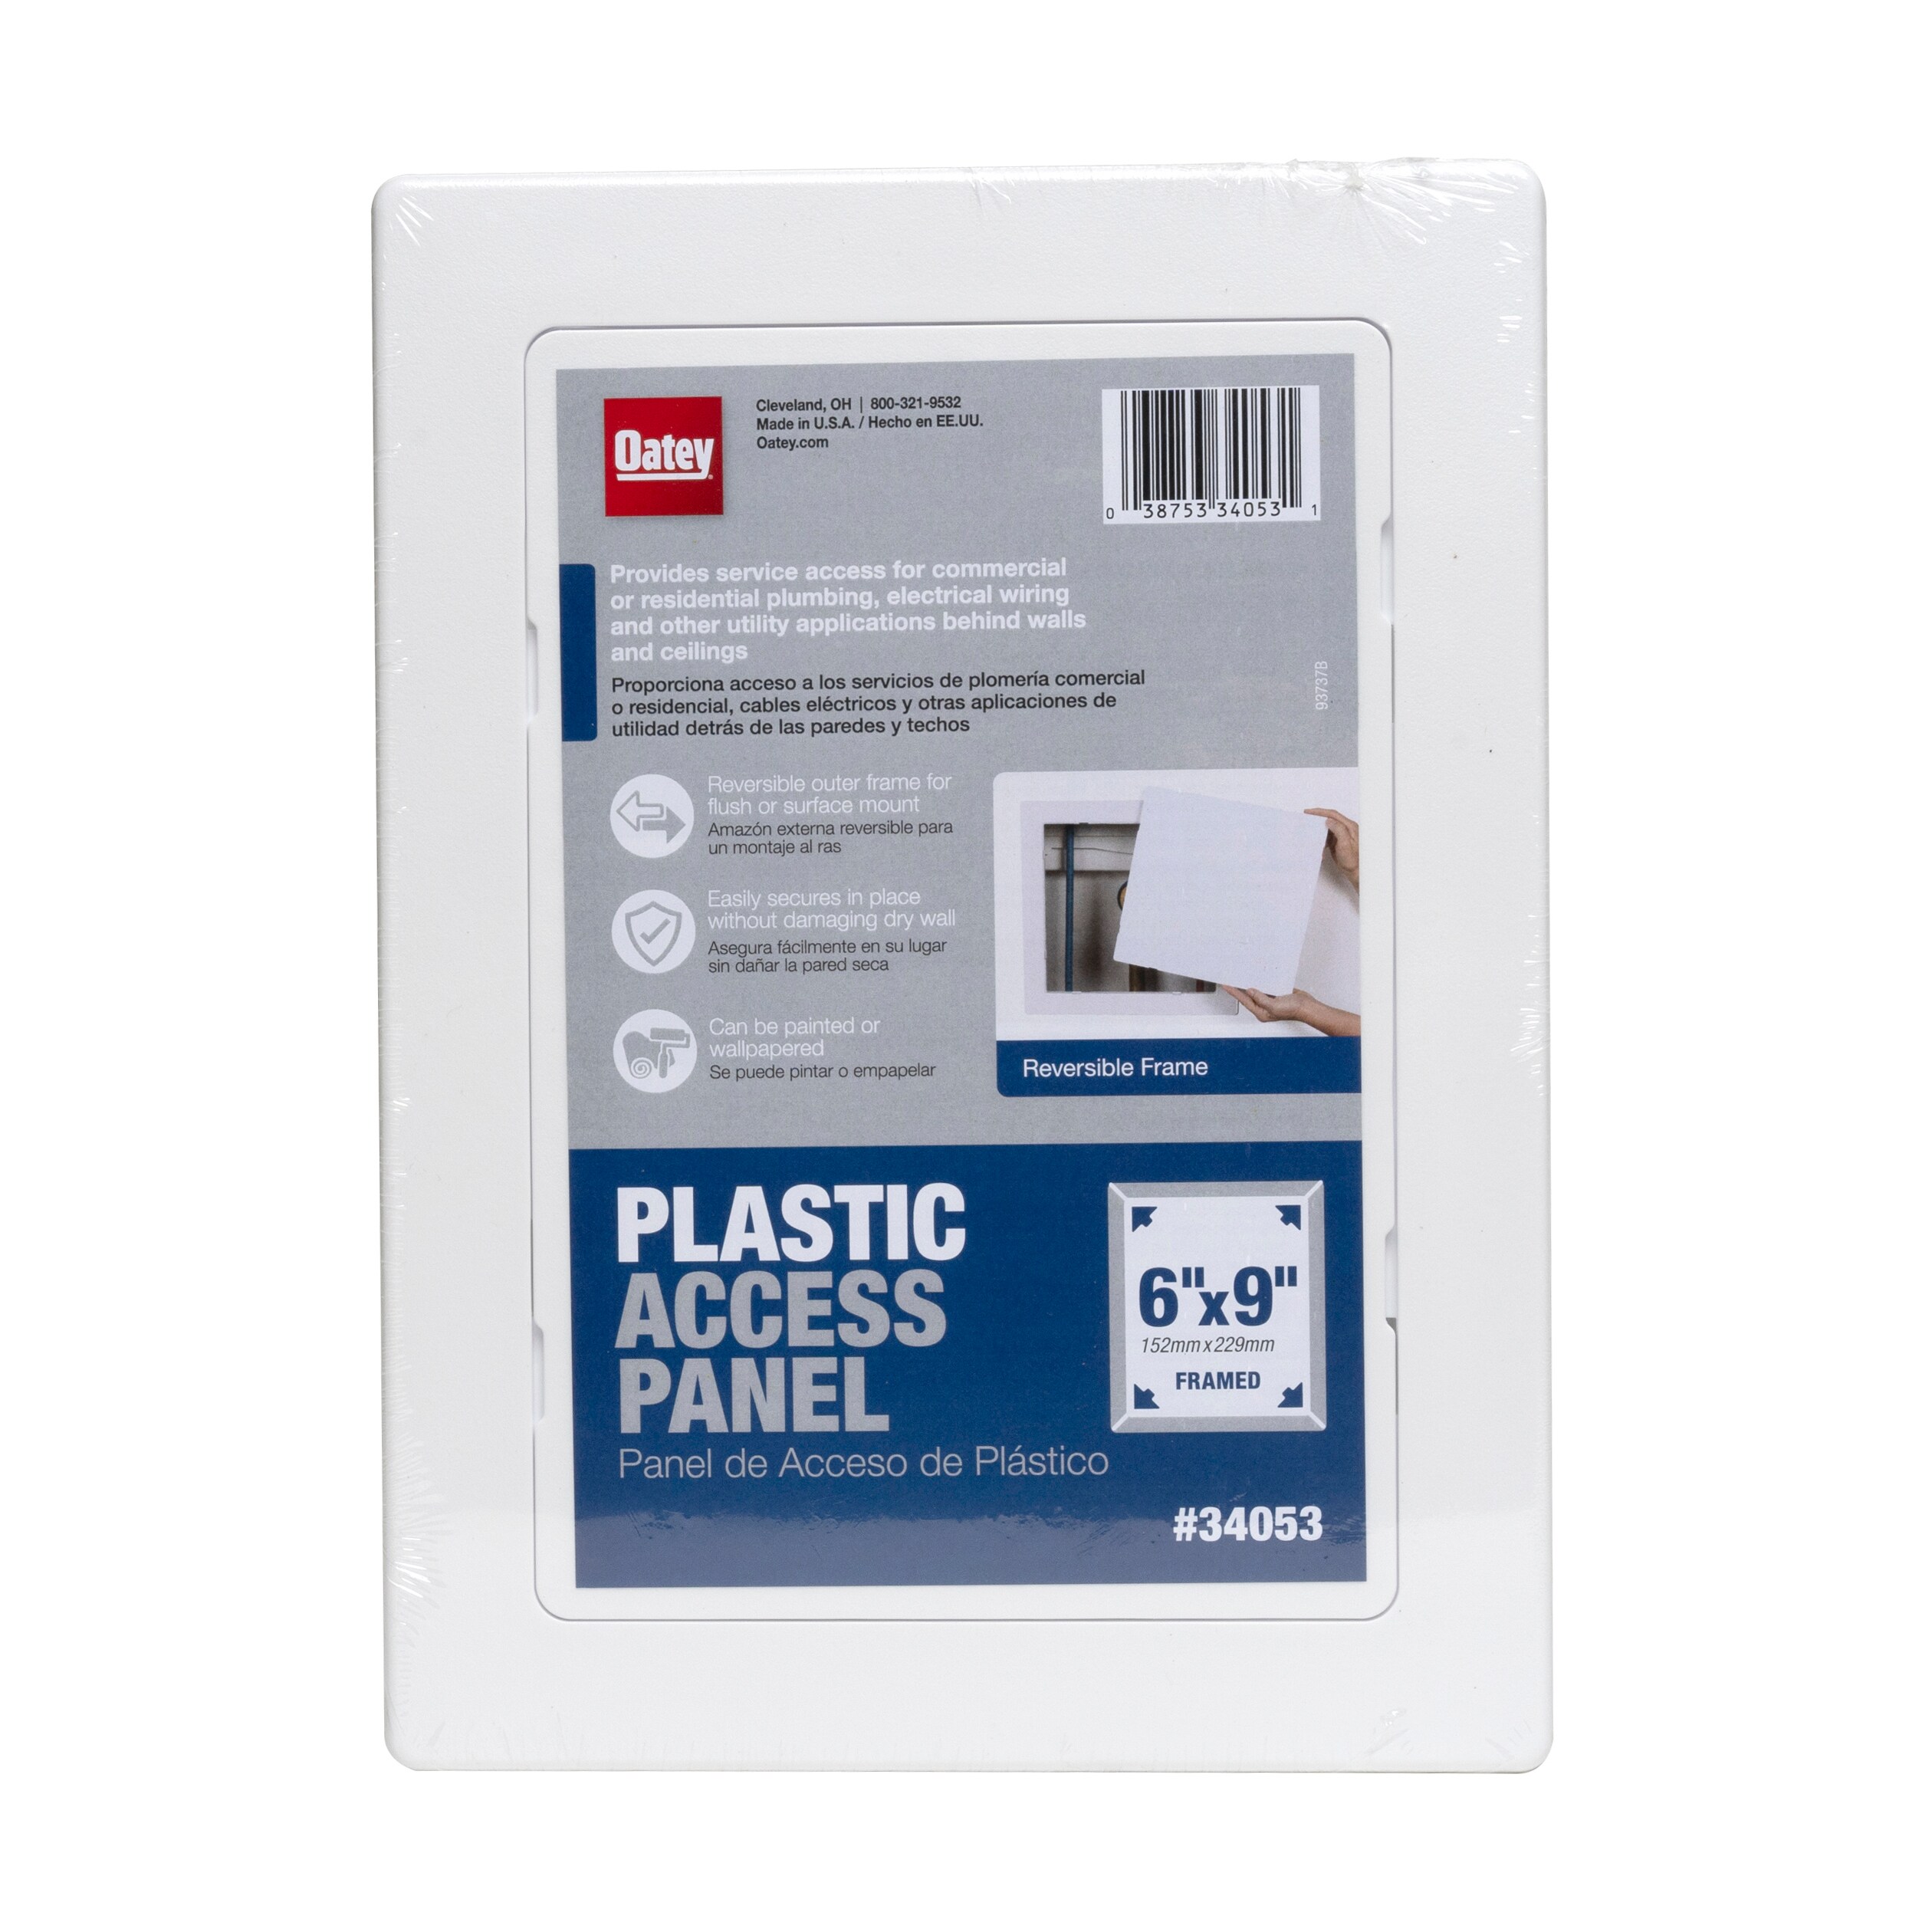 6-Inch by 9-Inch Oatey 34055 Plastic Access Panel 